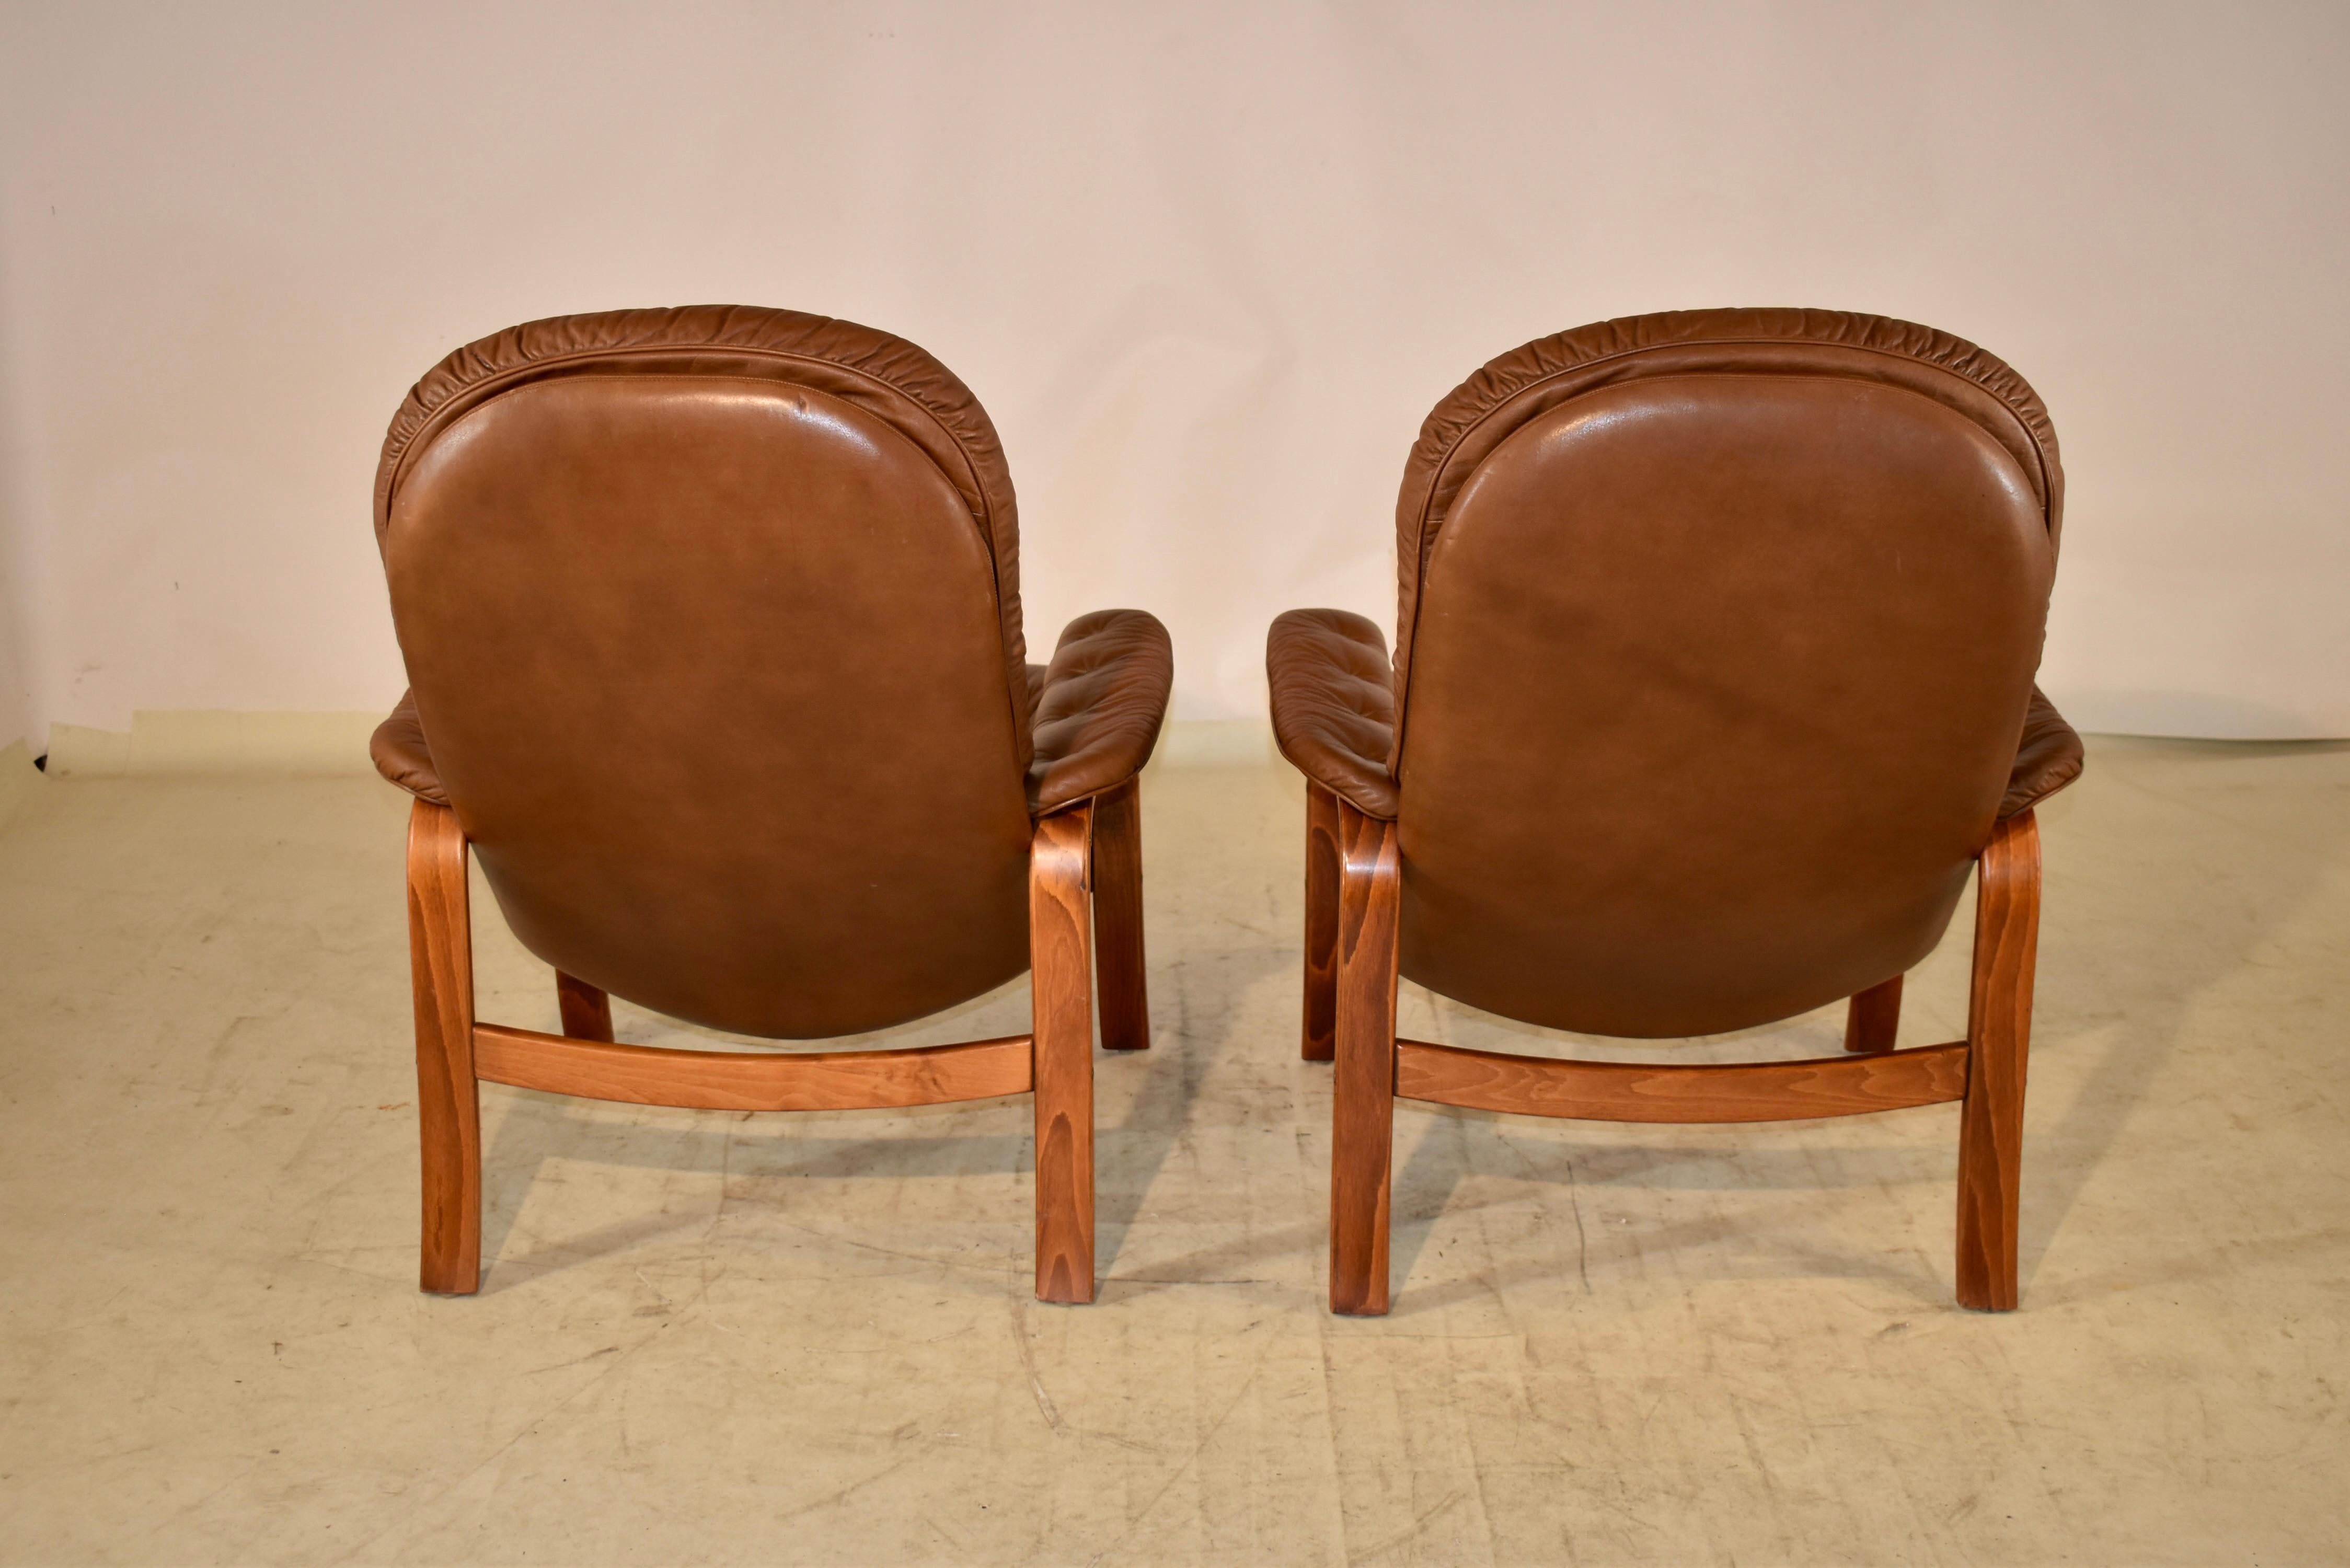 Swedish Mid-Century Modern Bentwood Lounge Chairs by Gote Mobler